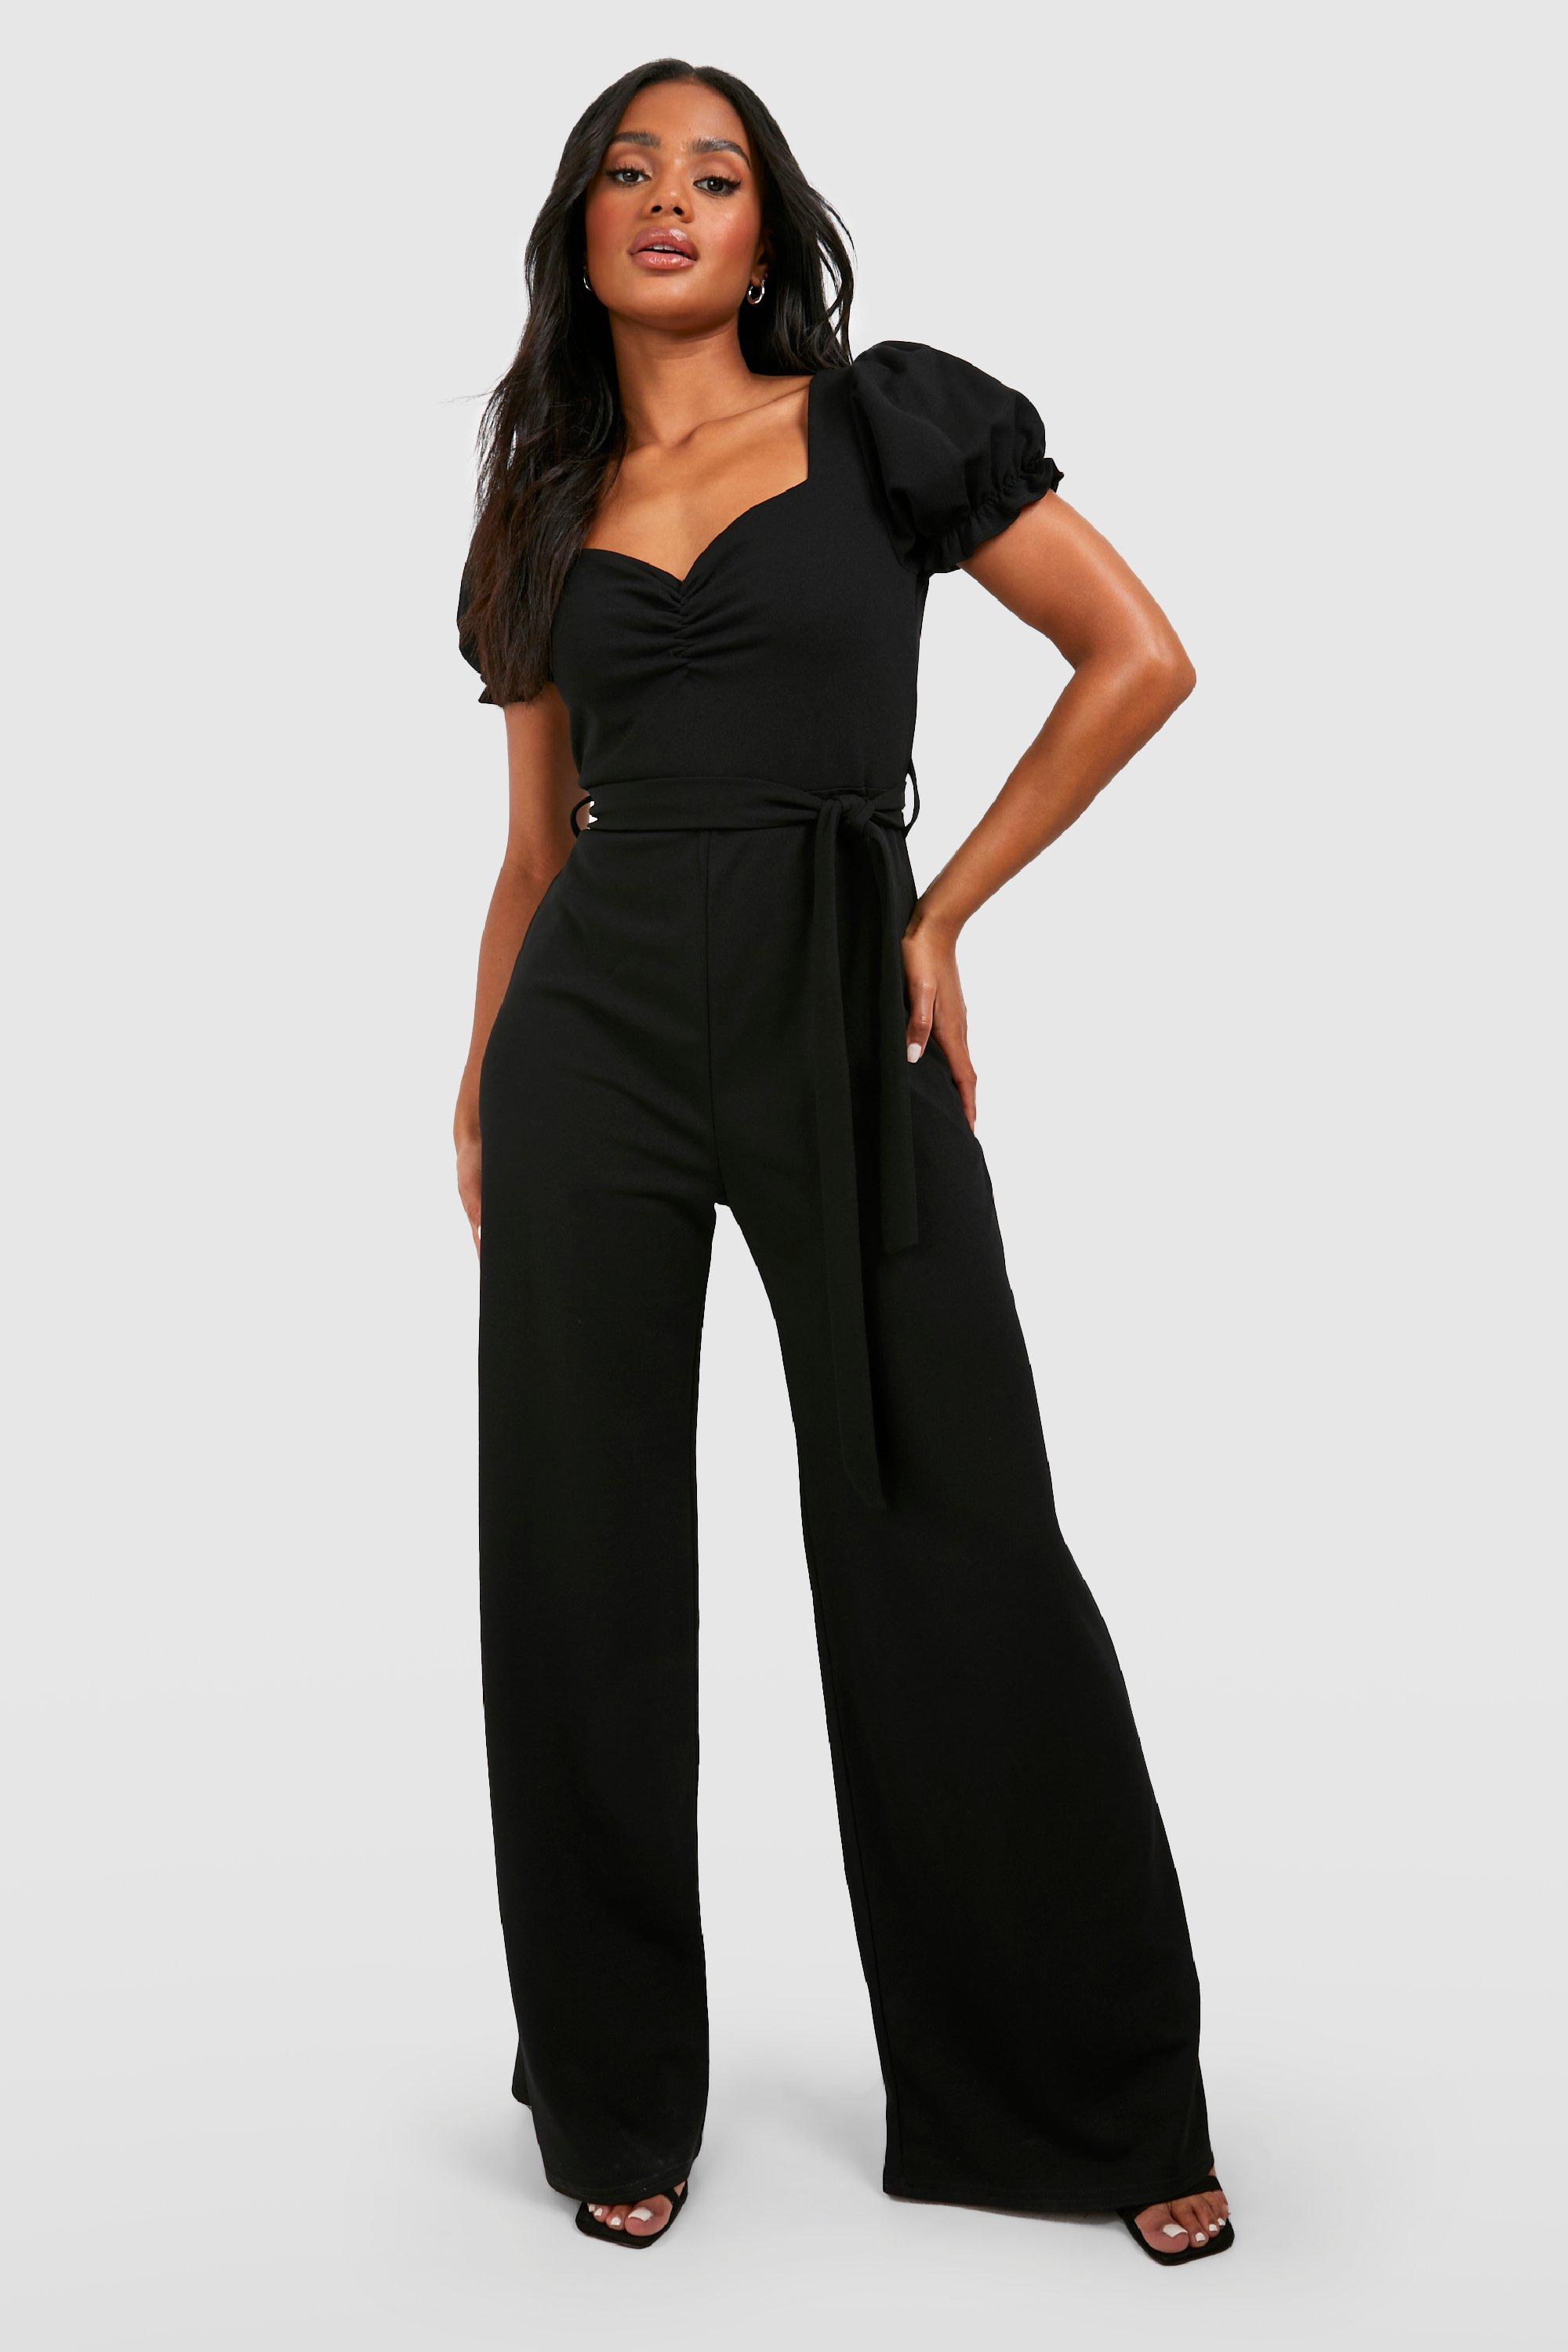 Buy Black Jumpsuits &Playsuits for Women by V&M Online | Ajio.com